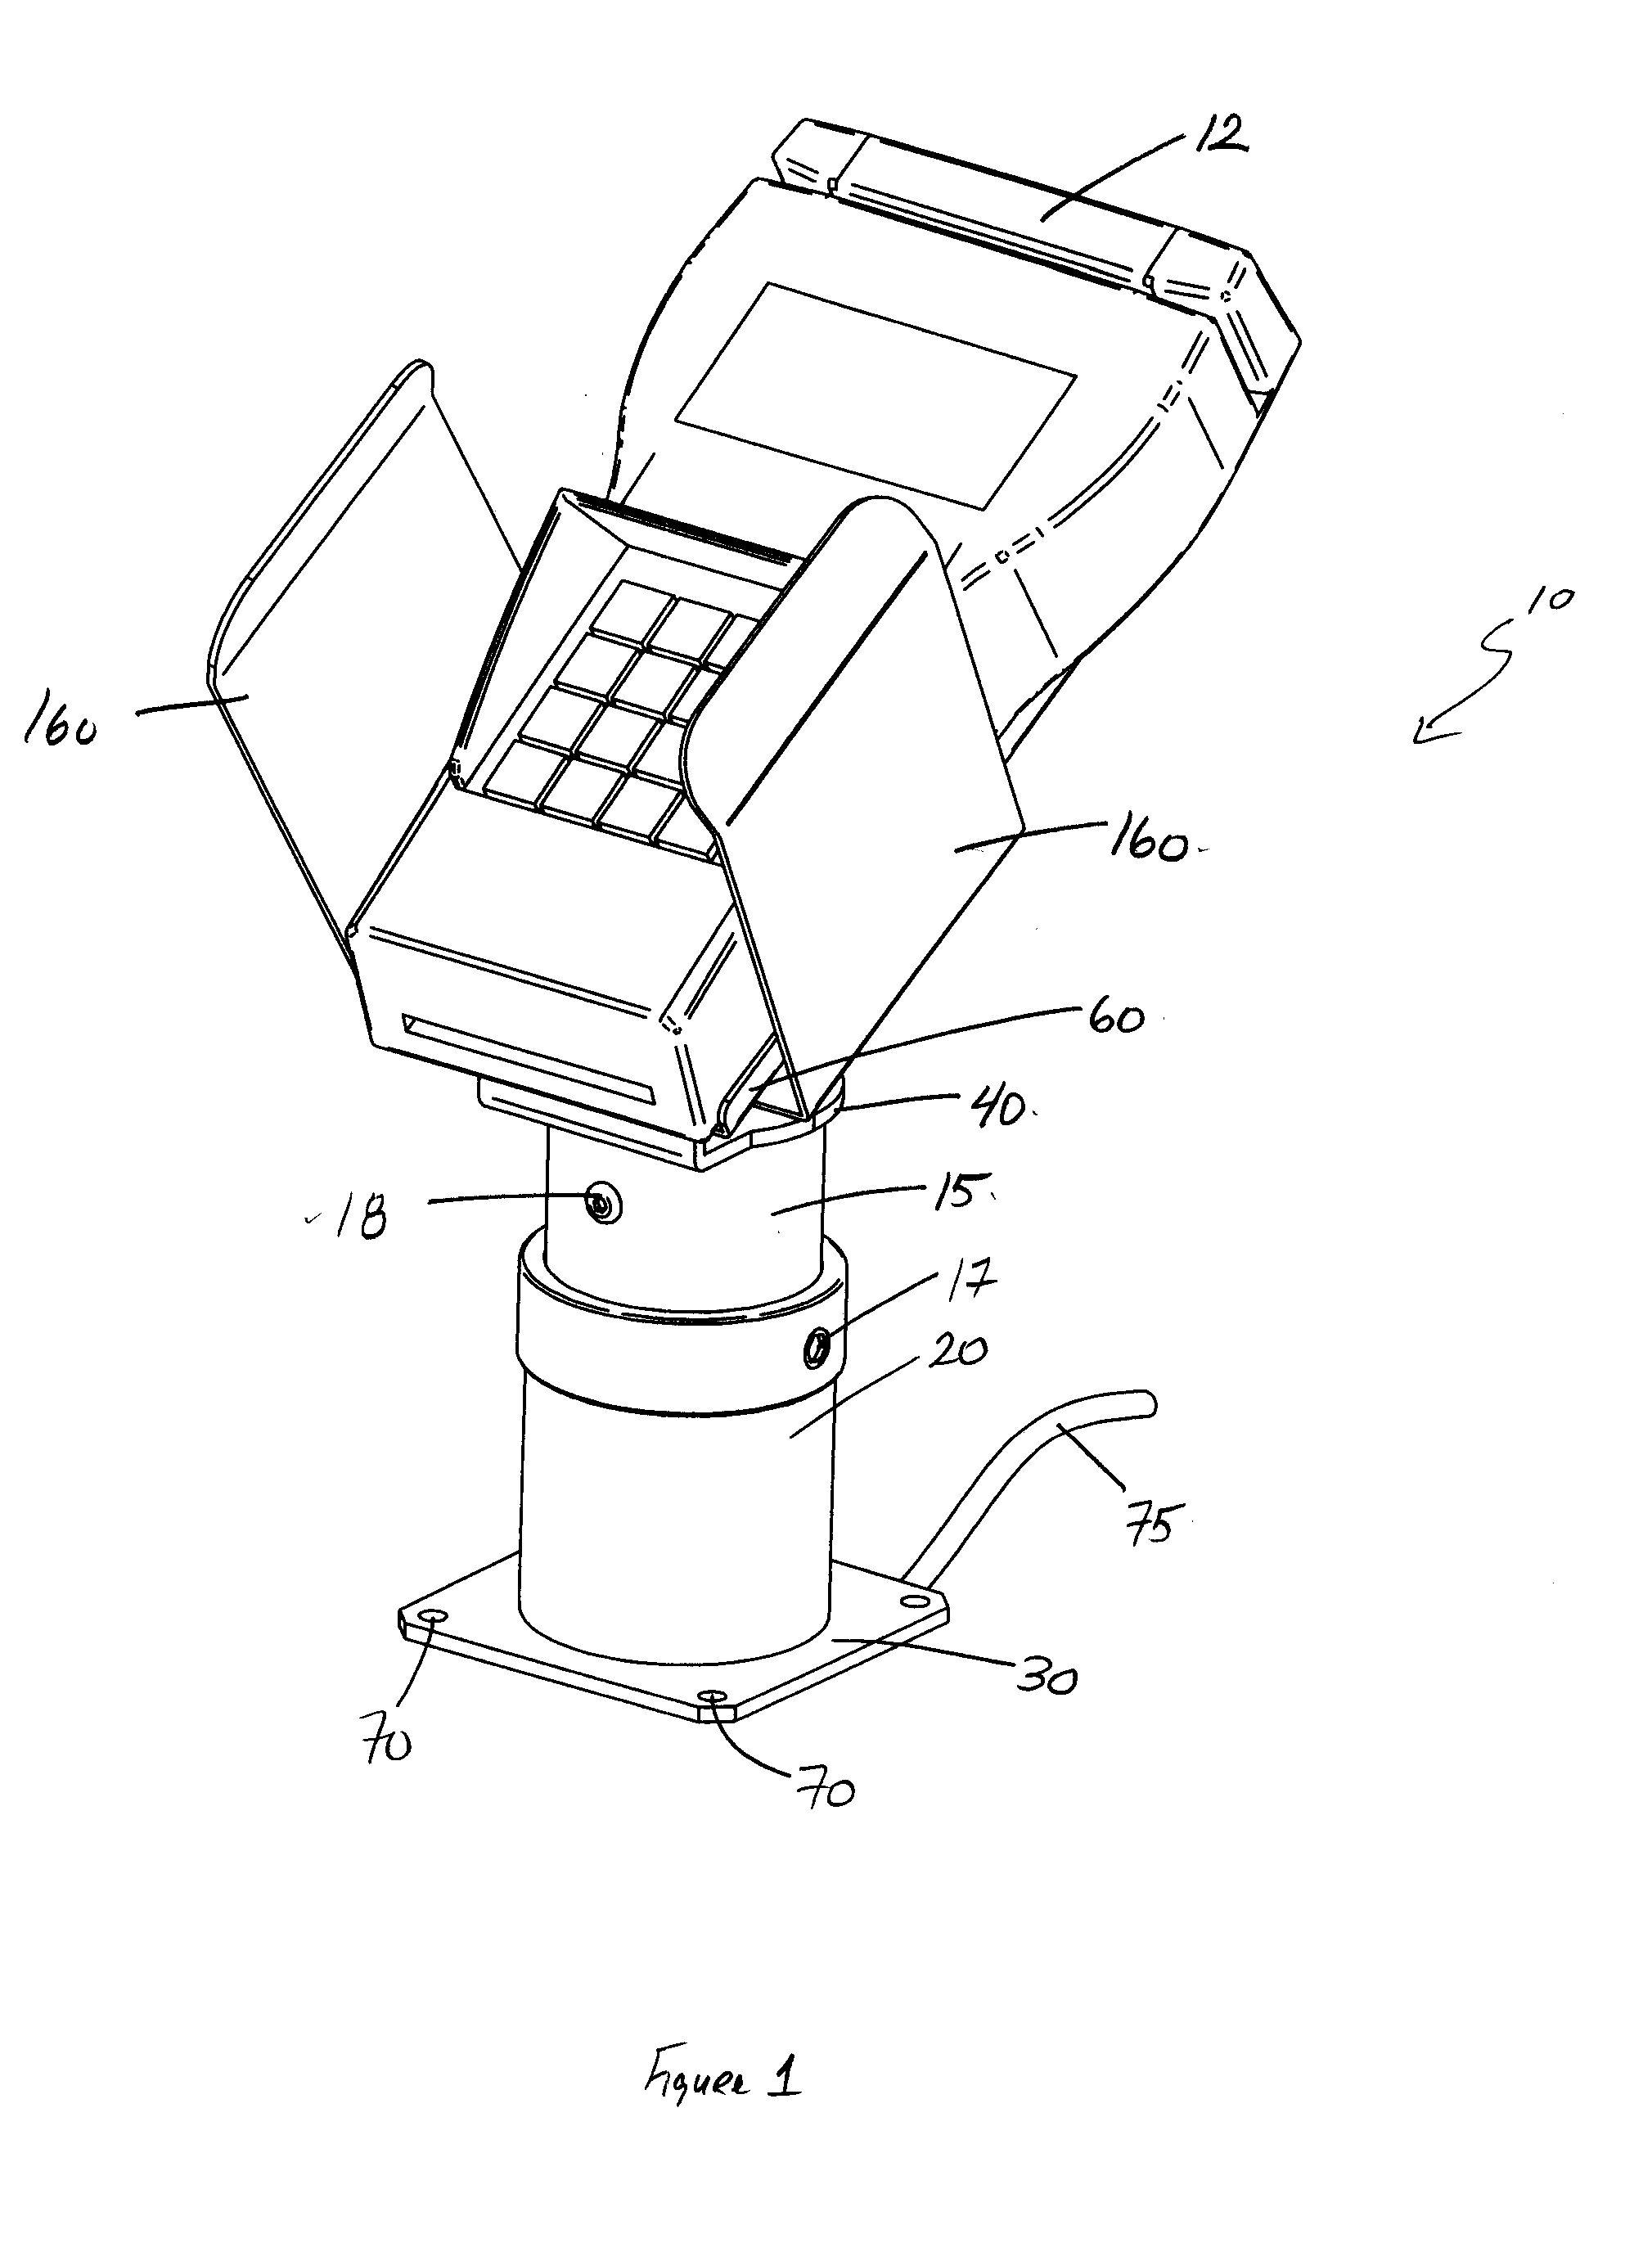 Information Transfer Device Support Stand